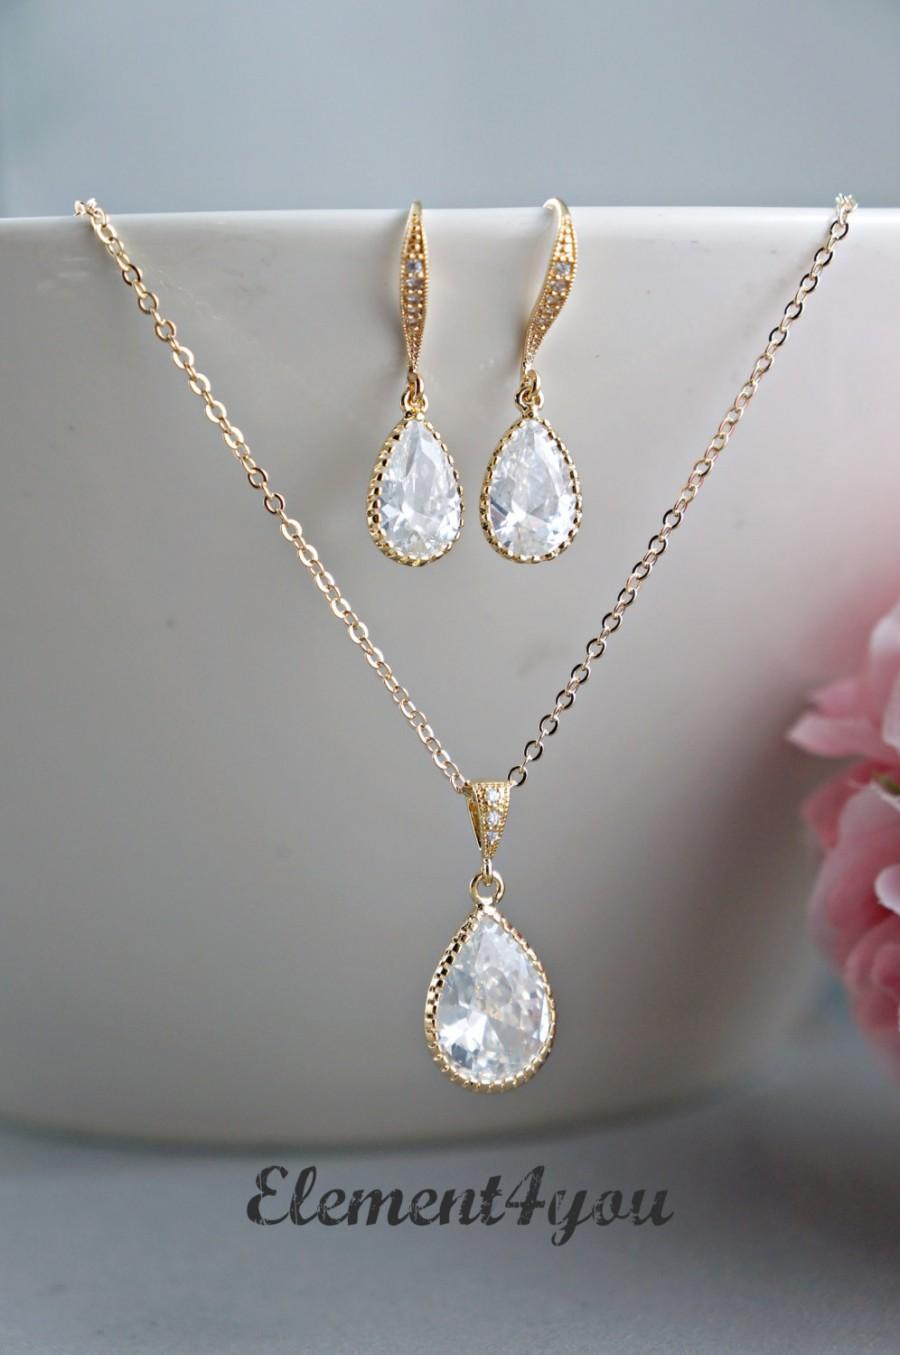 Mariage - Wedding bridal jewelry set, Bridesmaid necklace earrings, Pear drop Cubic Zirconia pendant CZ Earrings Bridal party gift Delicate goldchain